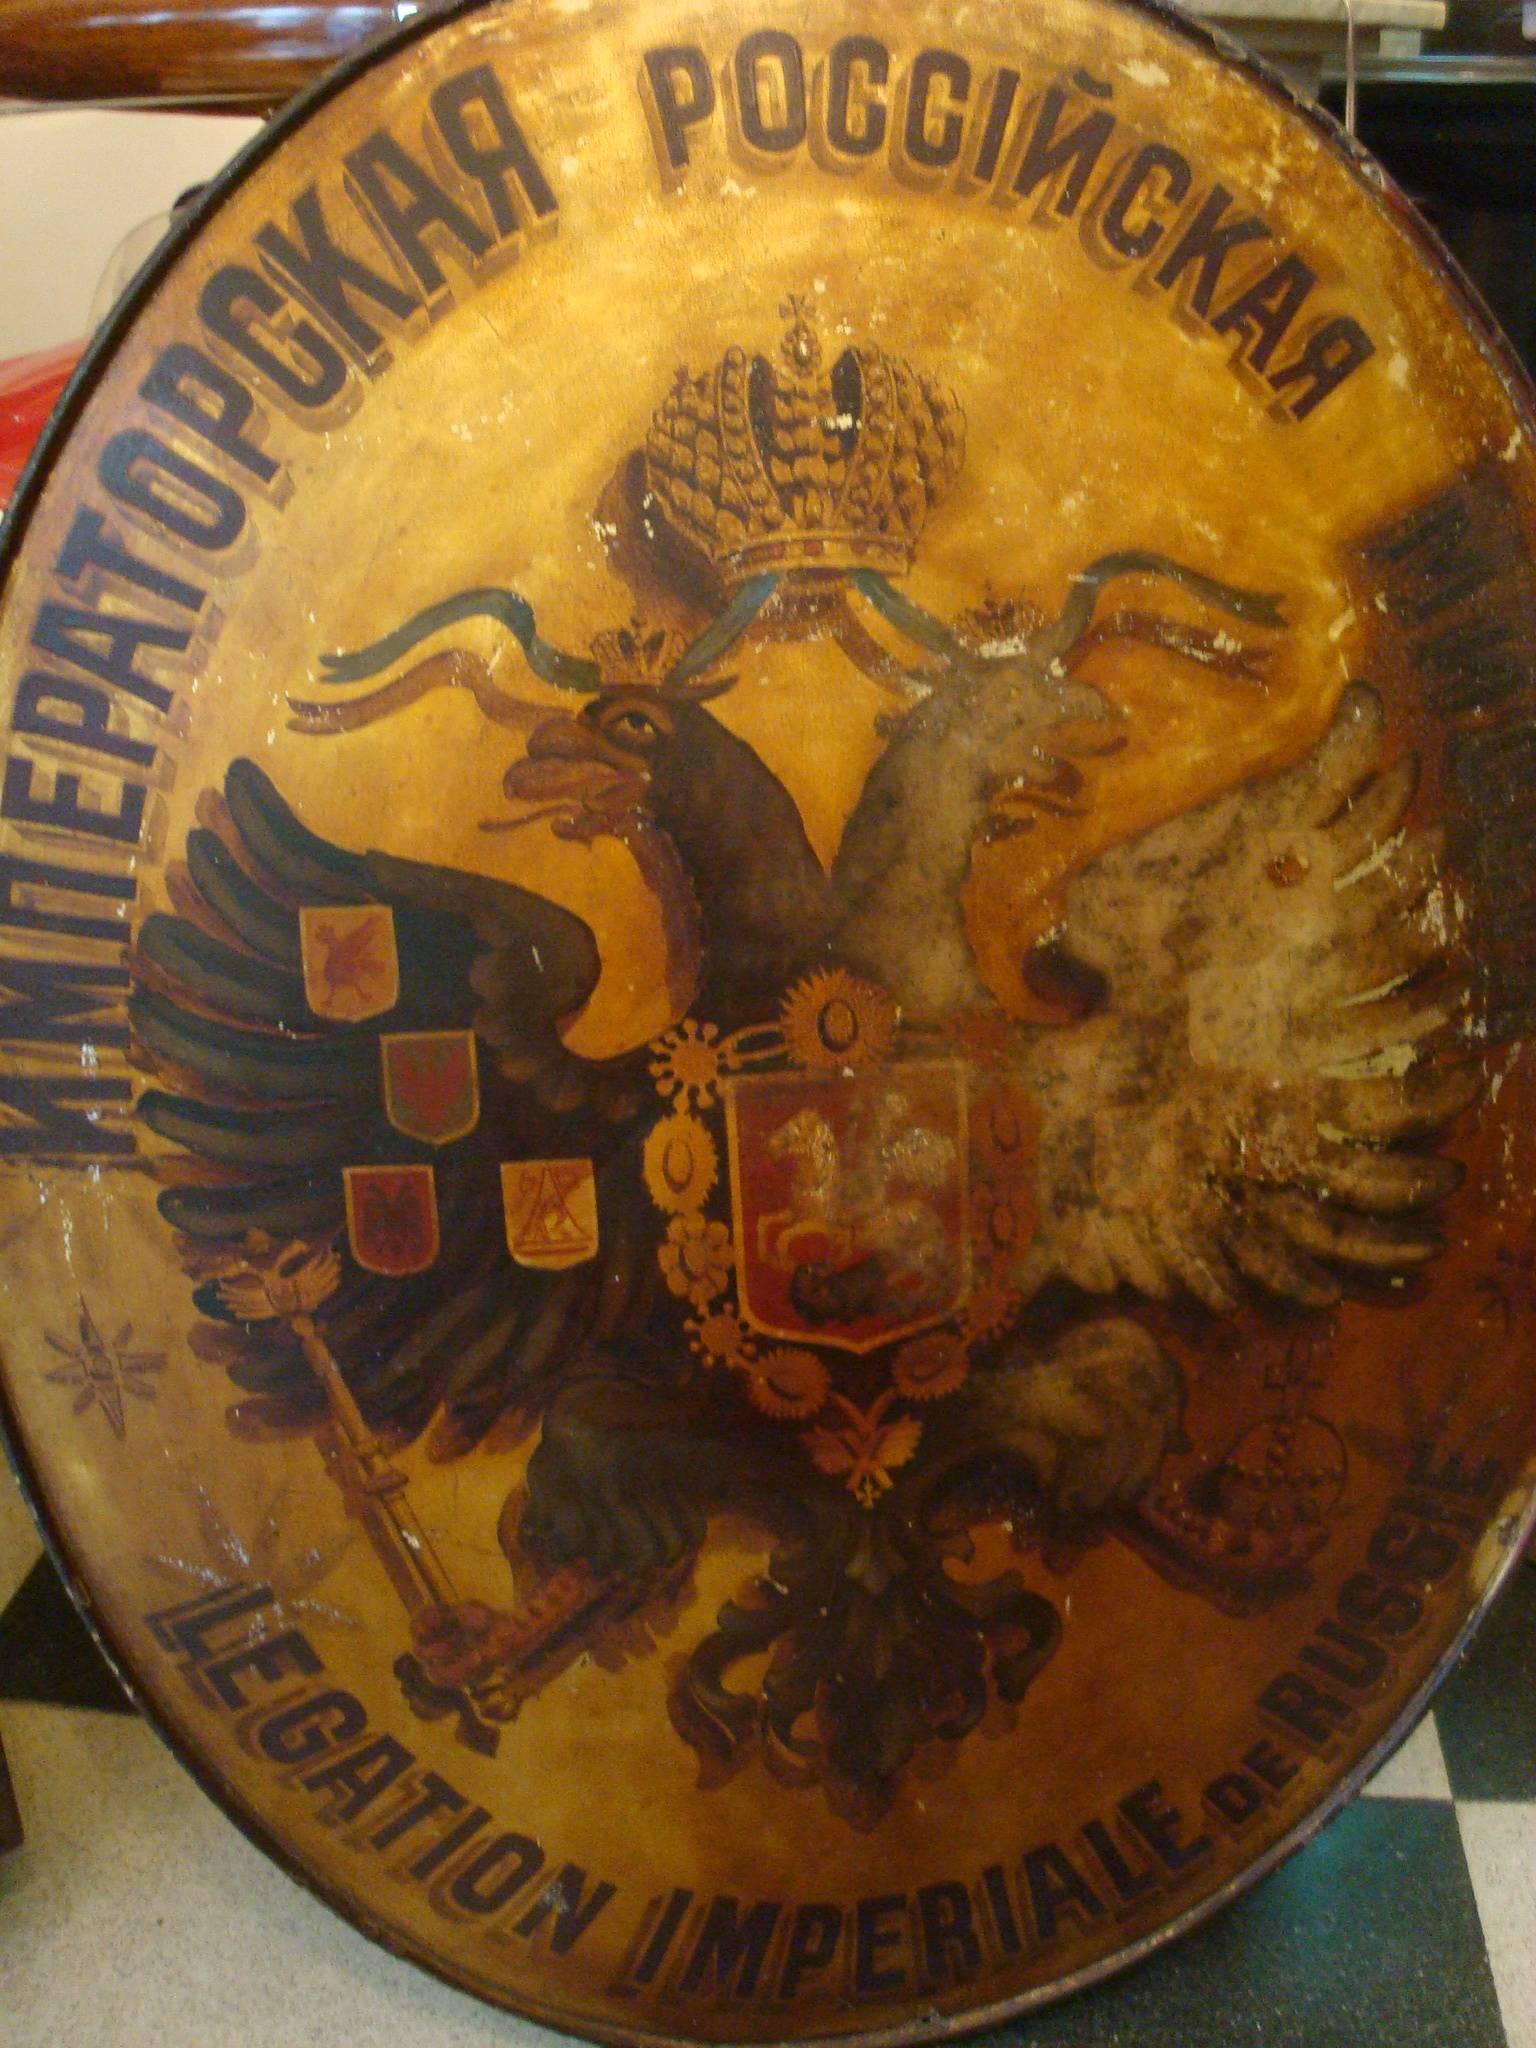 Early Embassy or Consulate painted sign. Sign says Legation Imperiale de Russie, this sign was used from 1850 to 1917, it is very rare to find these things with the Russian Empire Caot of arms, as everything for destroyed by the Revolution in